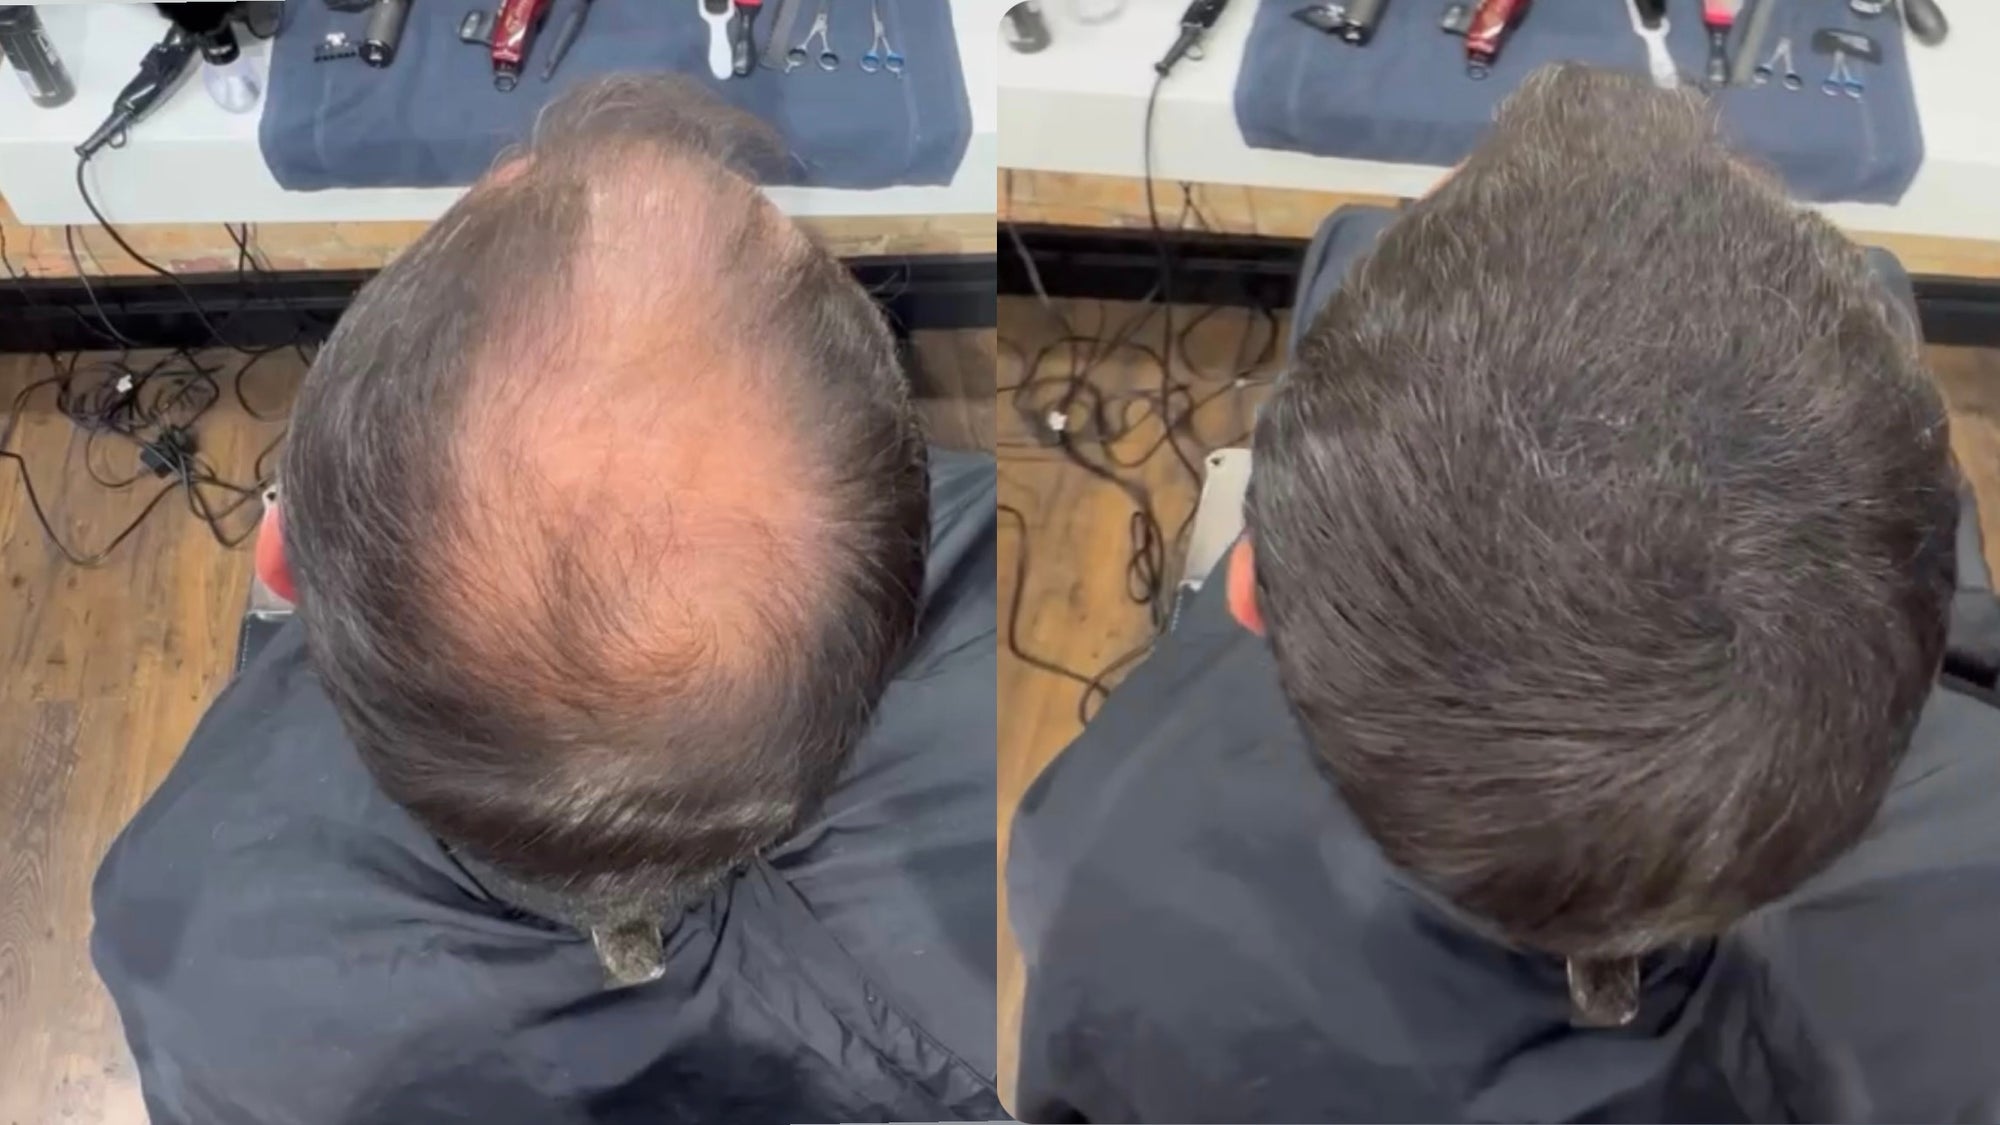 Regain Your Youthful Look: Male Hair Loss Reversed with Hair Fibres